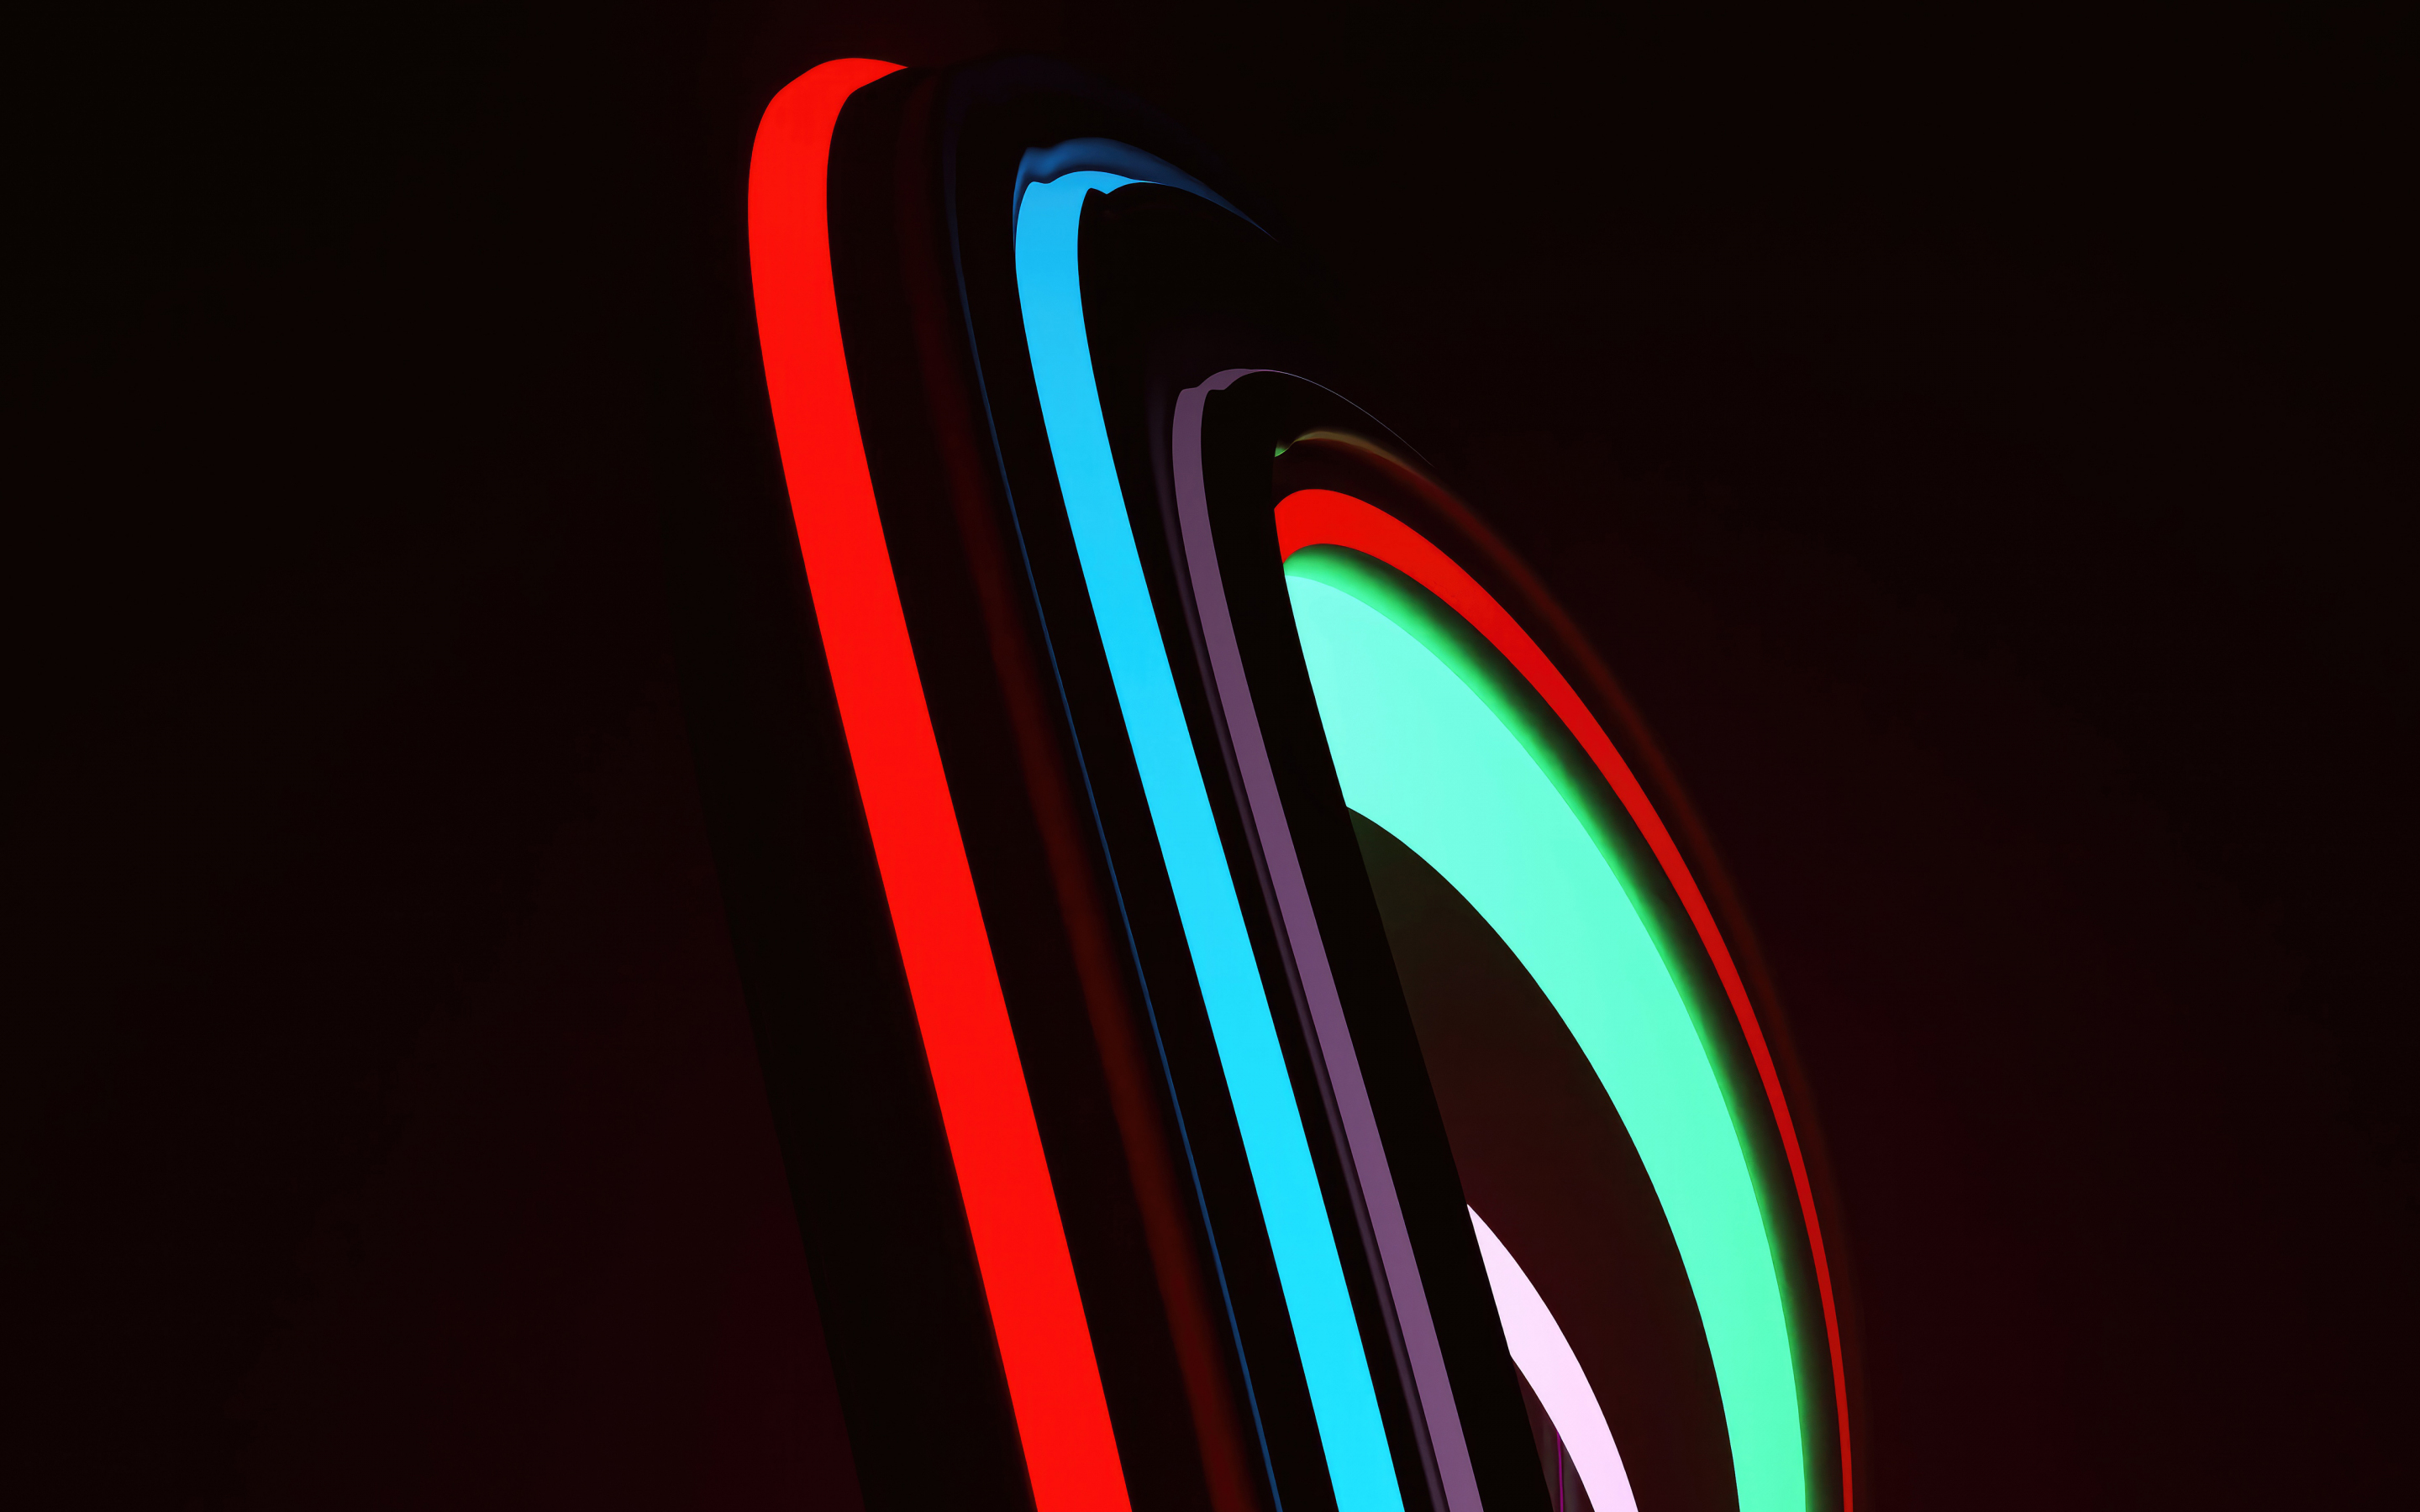 Neon shape, stirpes and lines curvy and colorful, abstract, 2880x1800 wallpaper